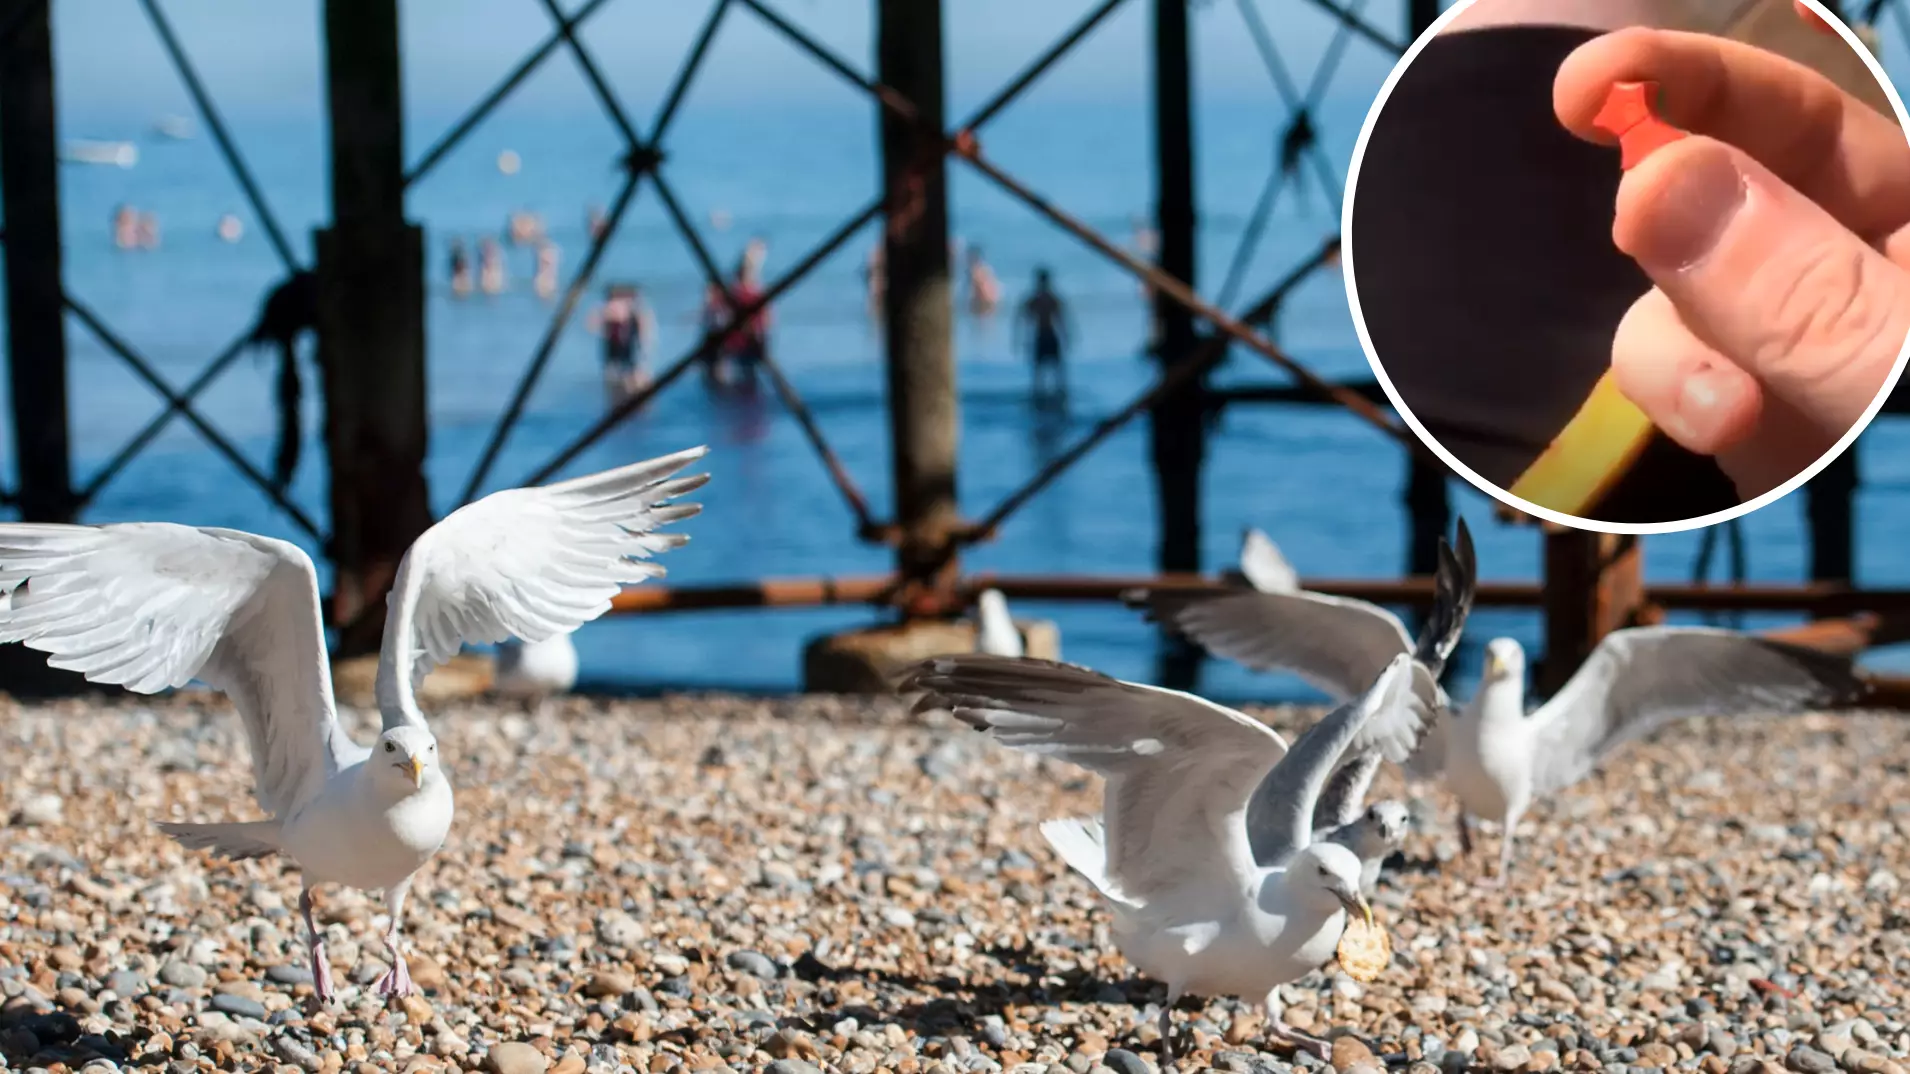 Man Appears To Spike Seagull With Ecstasy Tablet